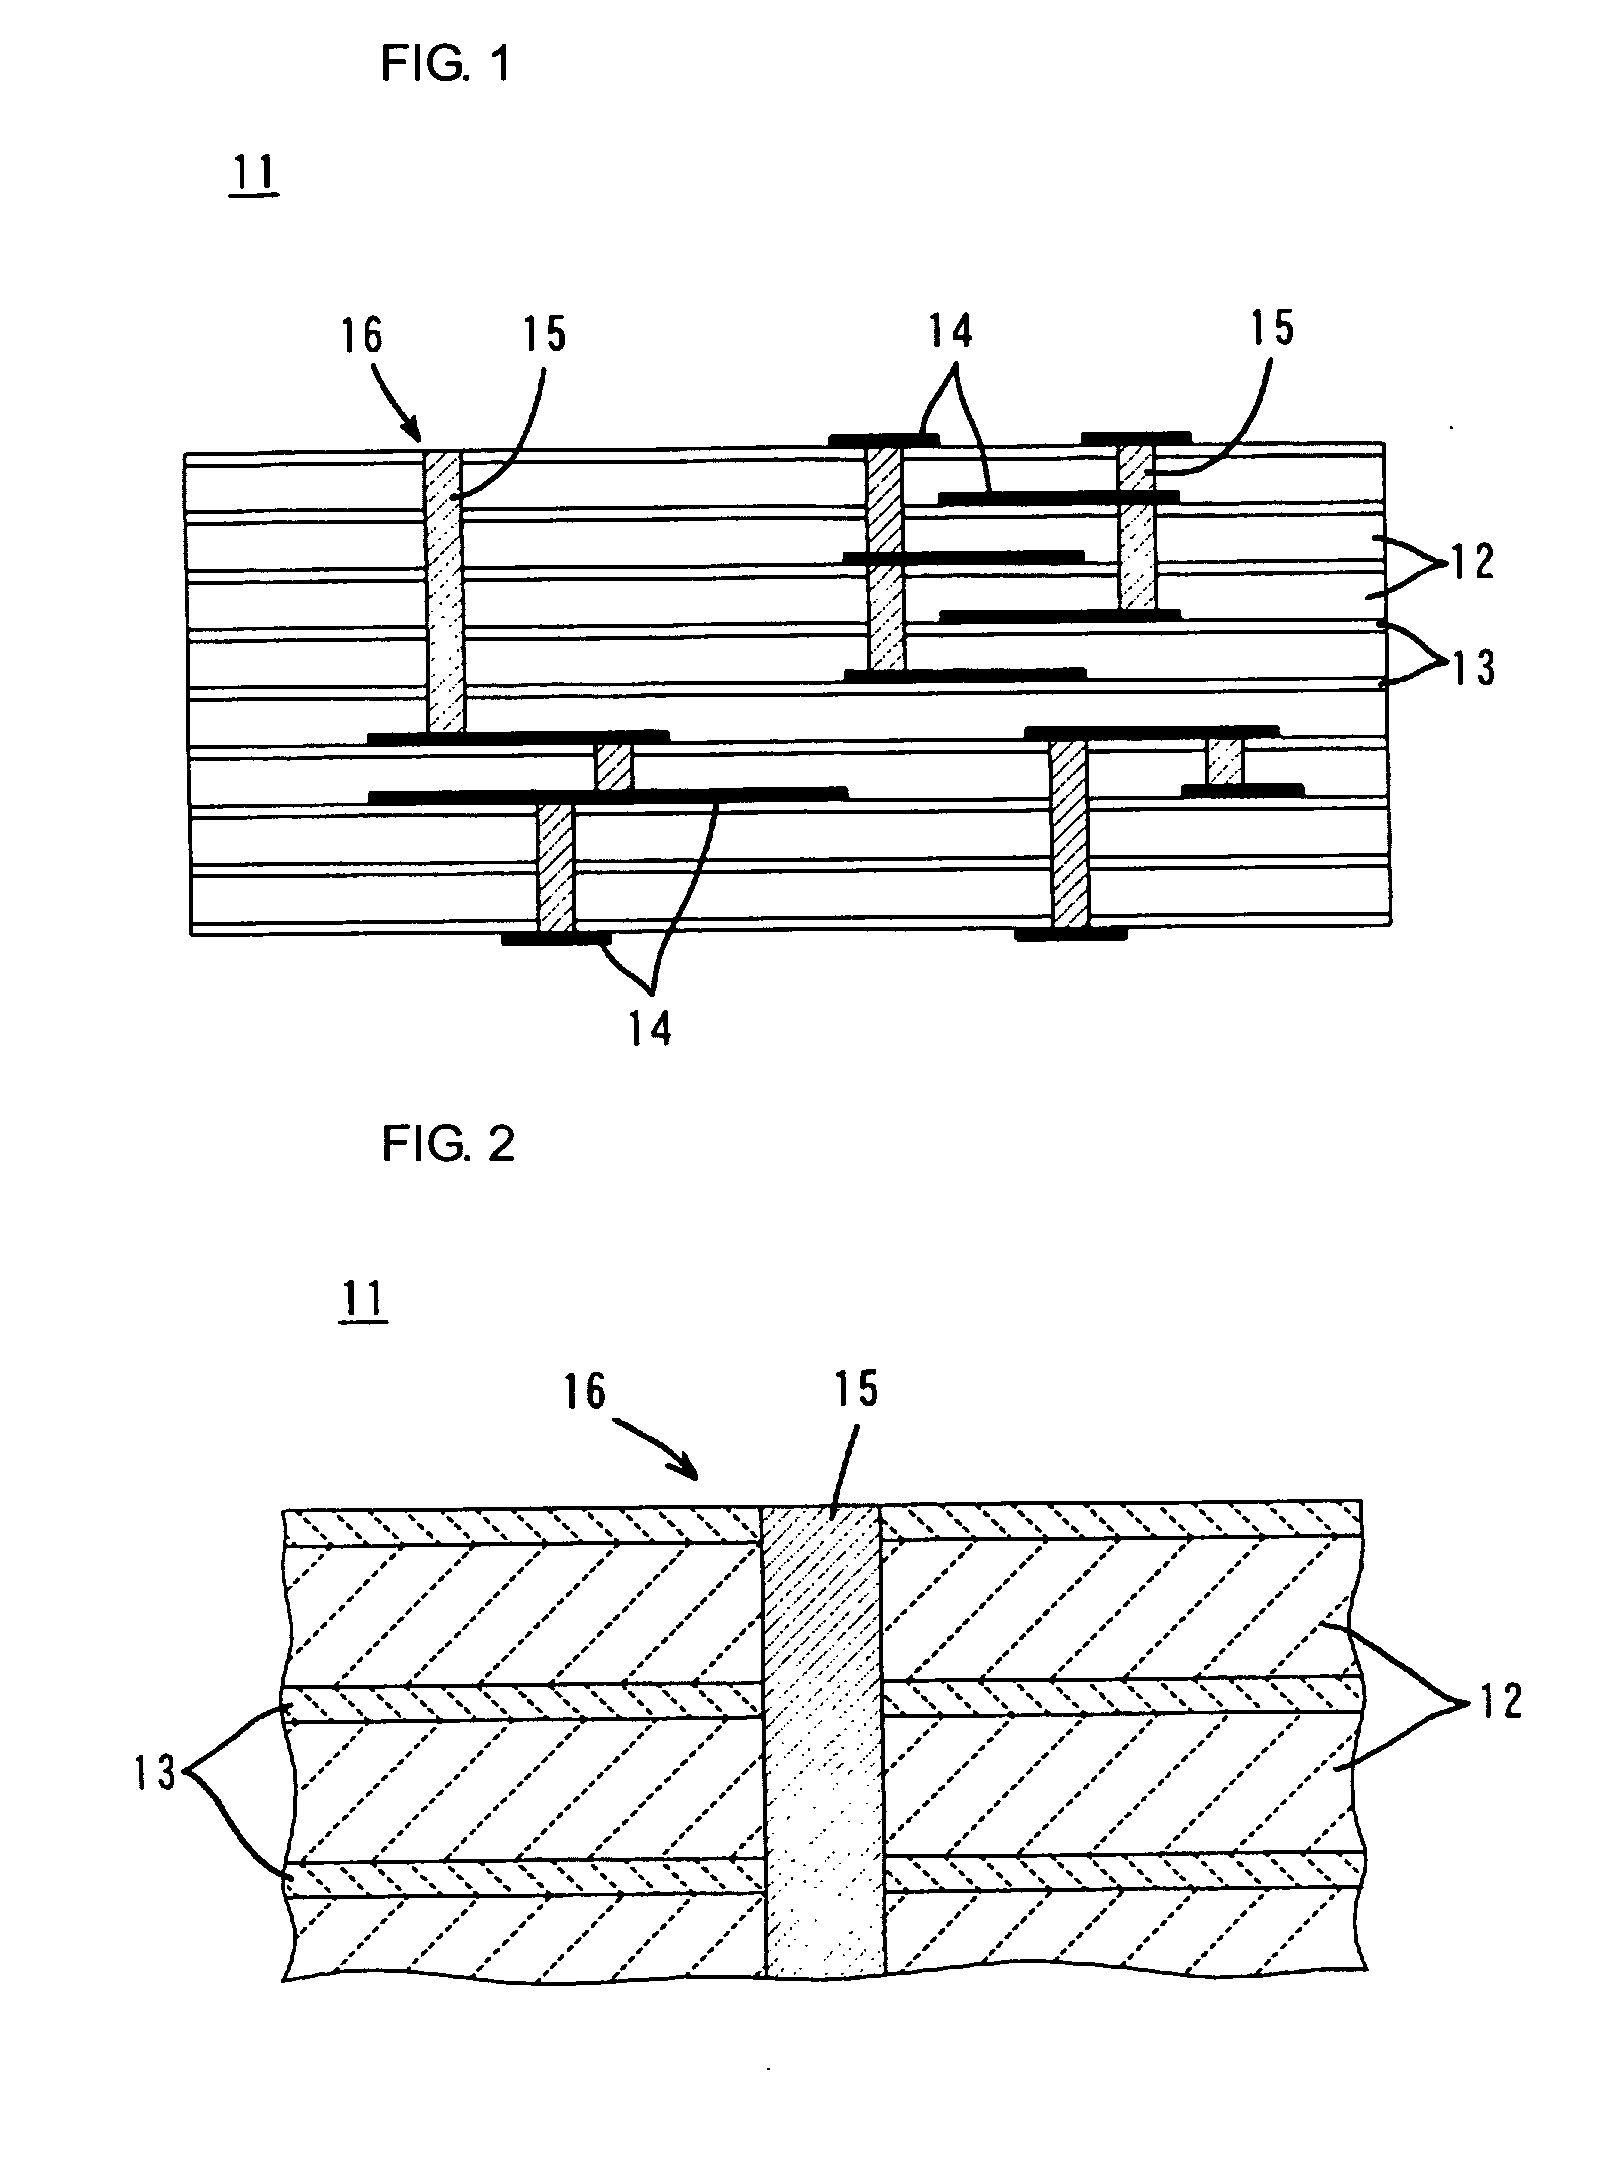 Electrically conductive paste and multilayer ceramic substrate